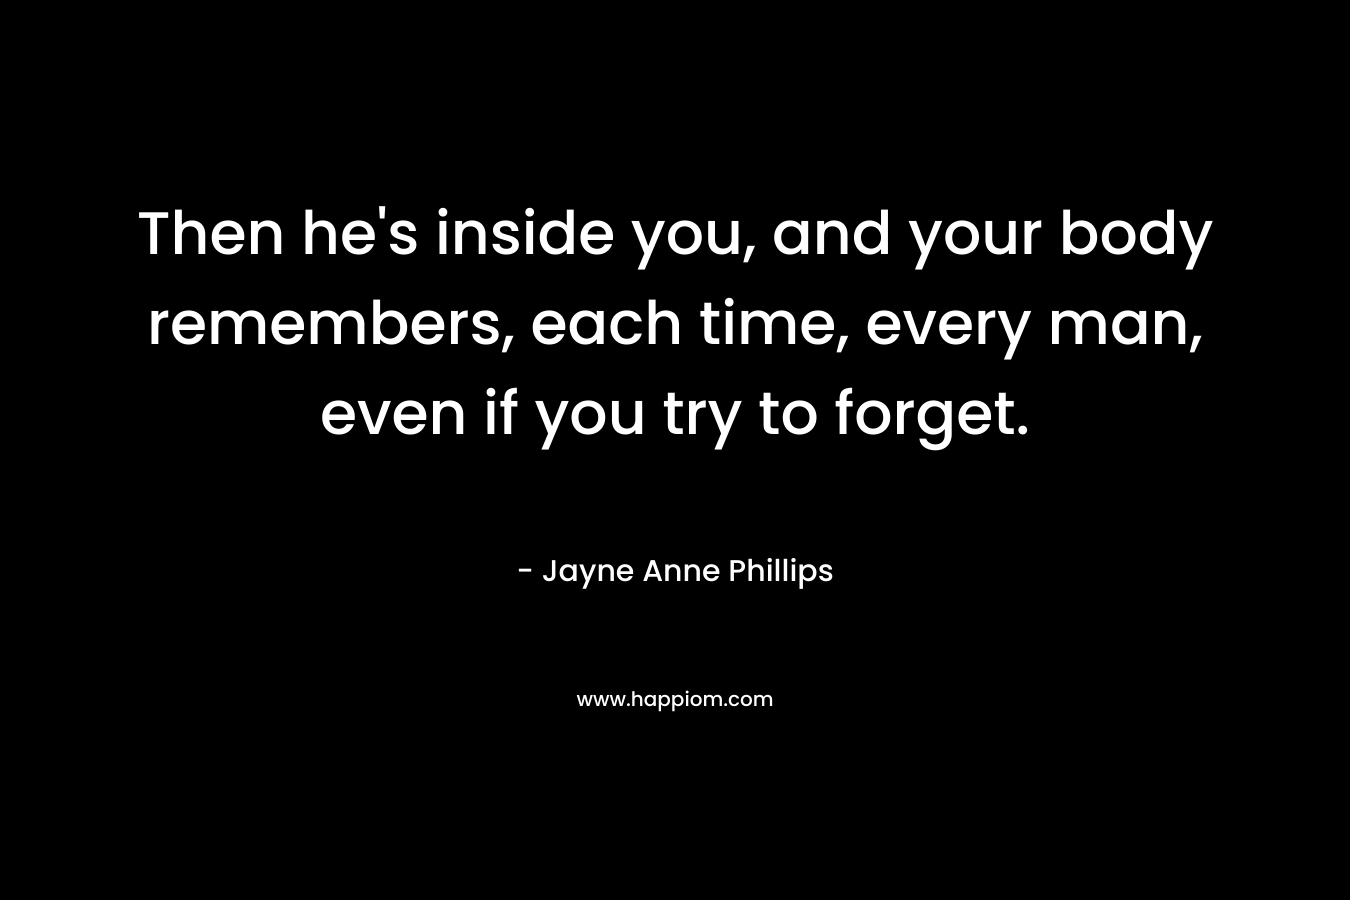 Then he's inside you, and your body remembers, each time, every man, even if you try to forget.